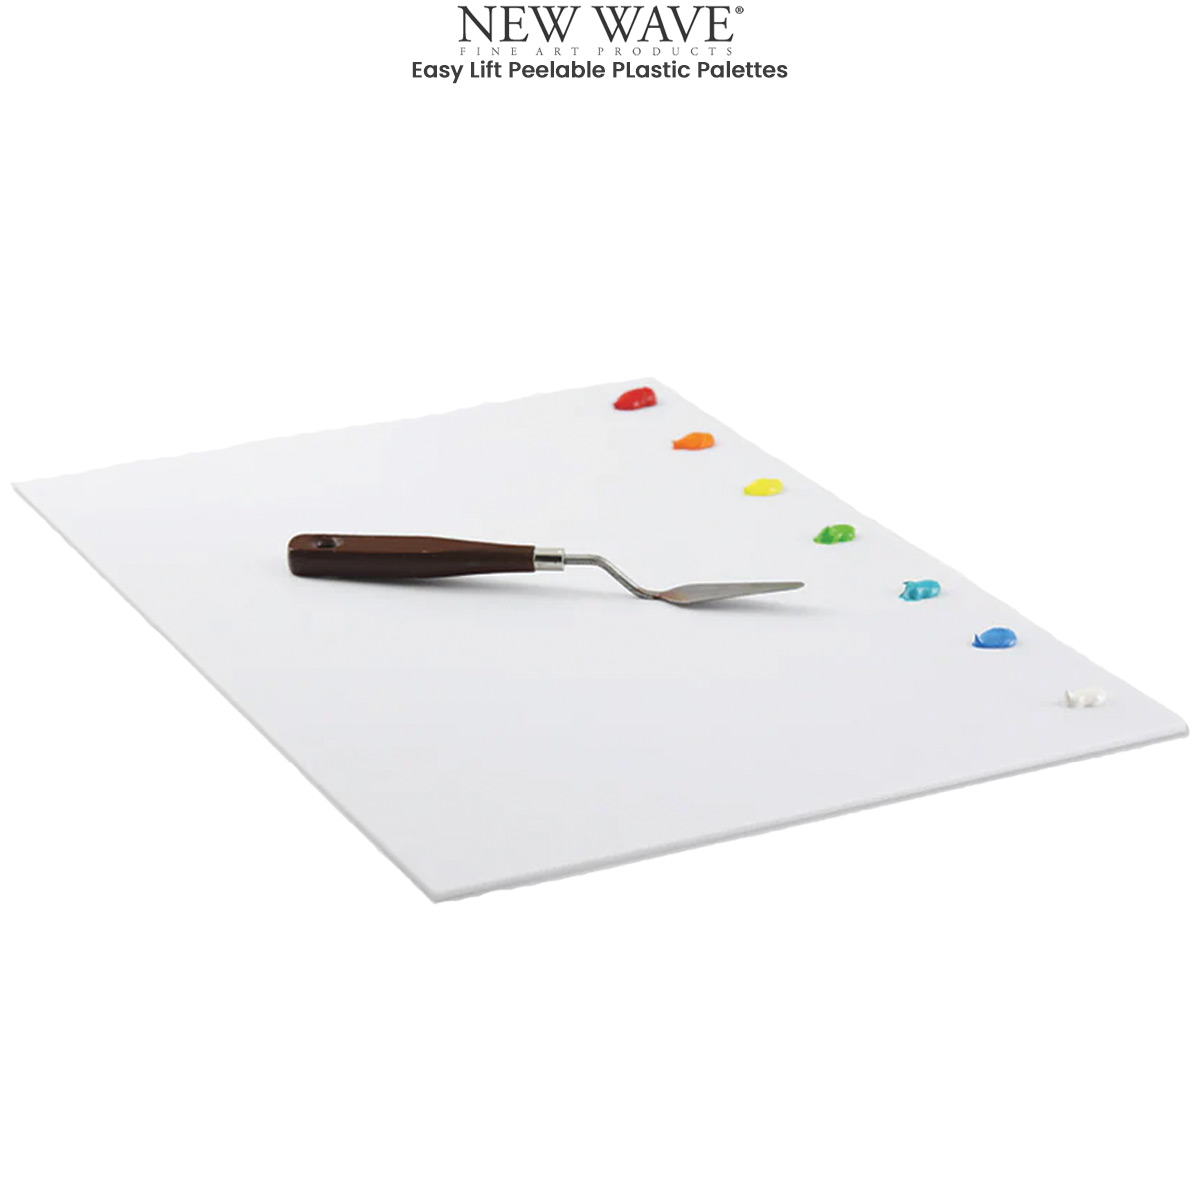 New Wave Posh Glass Tabletop Palettes